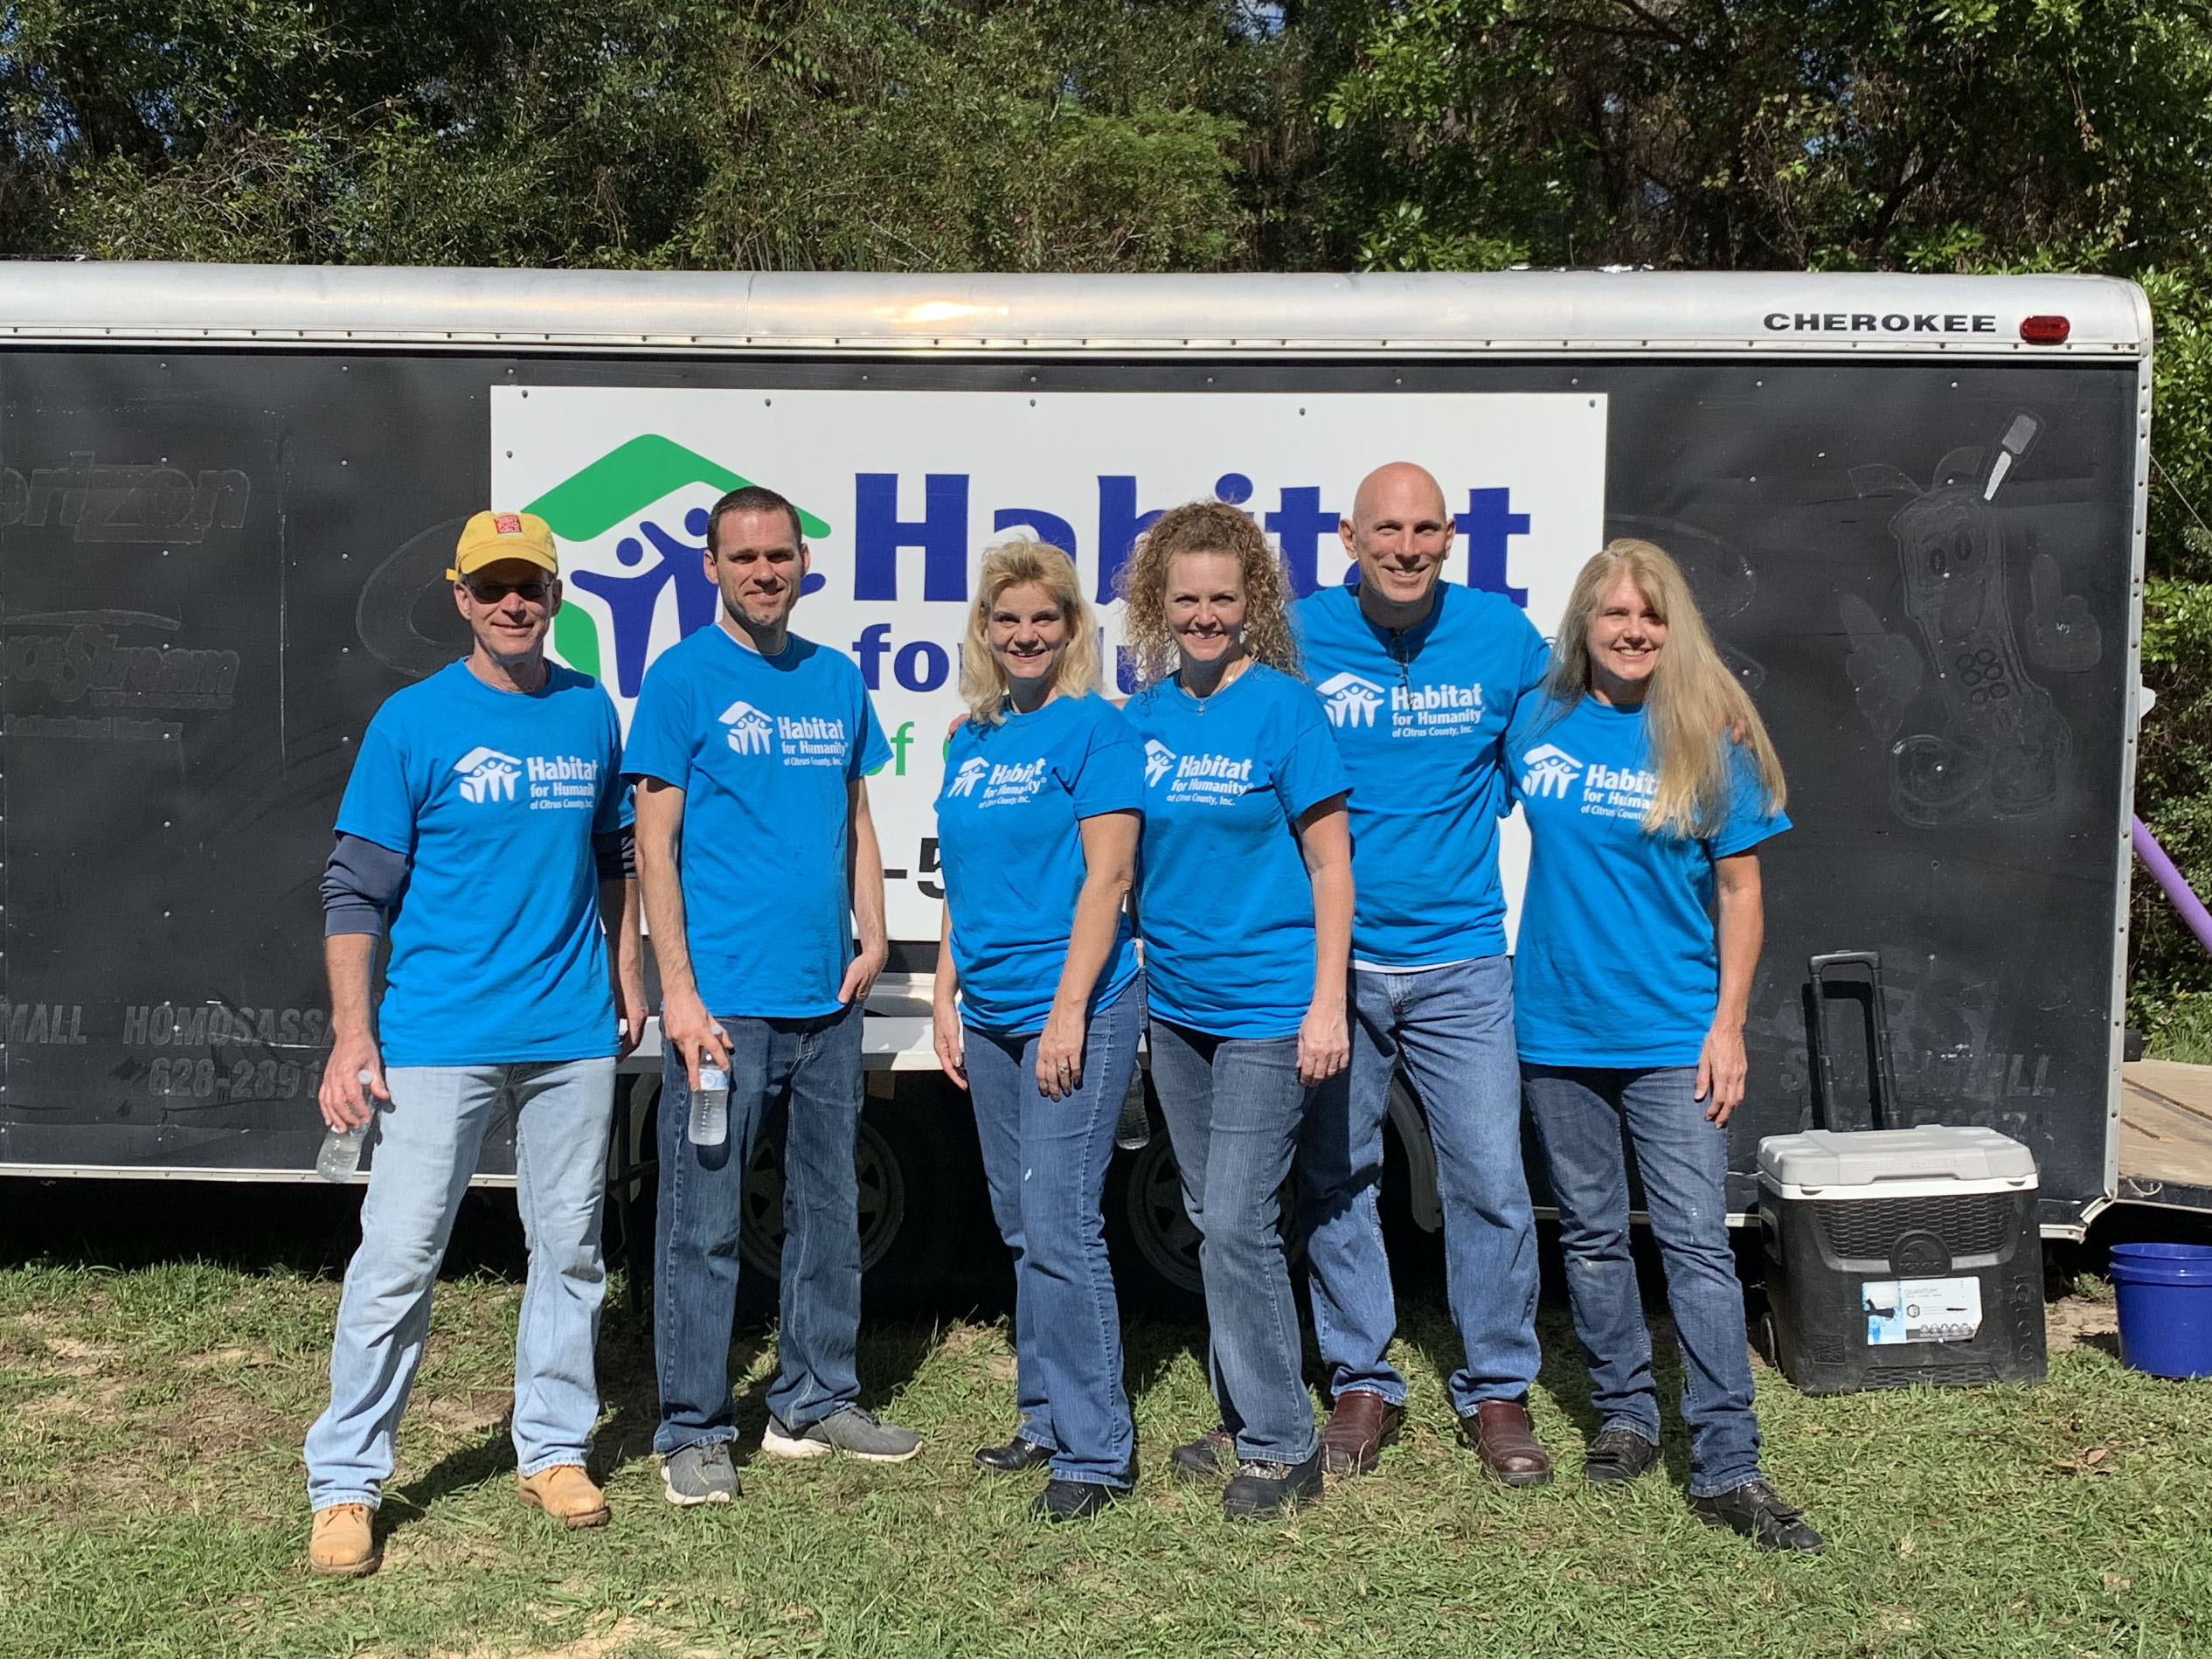 Florida office staff members participate in a Habitat for Humanity project.